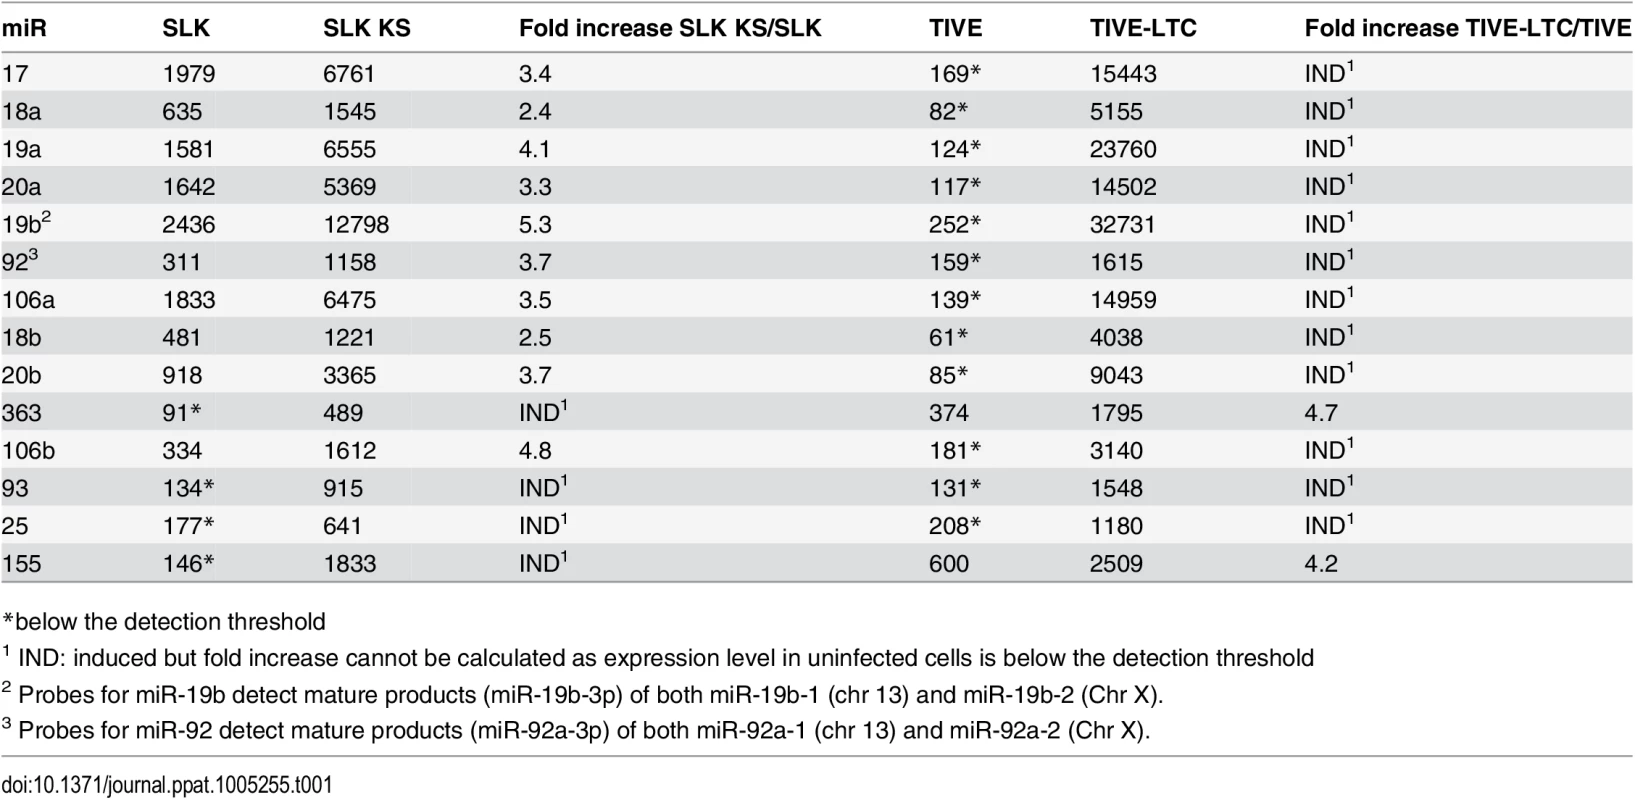 Expression of miRNAs in uninfected and KSHV-infected SLK and TIVE cells.